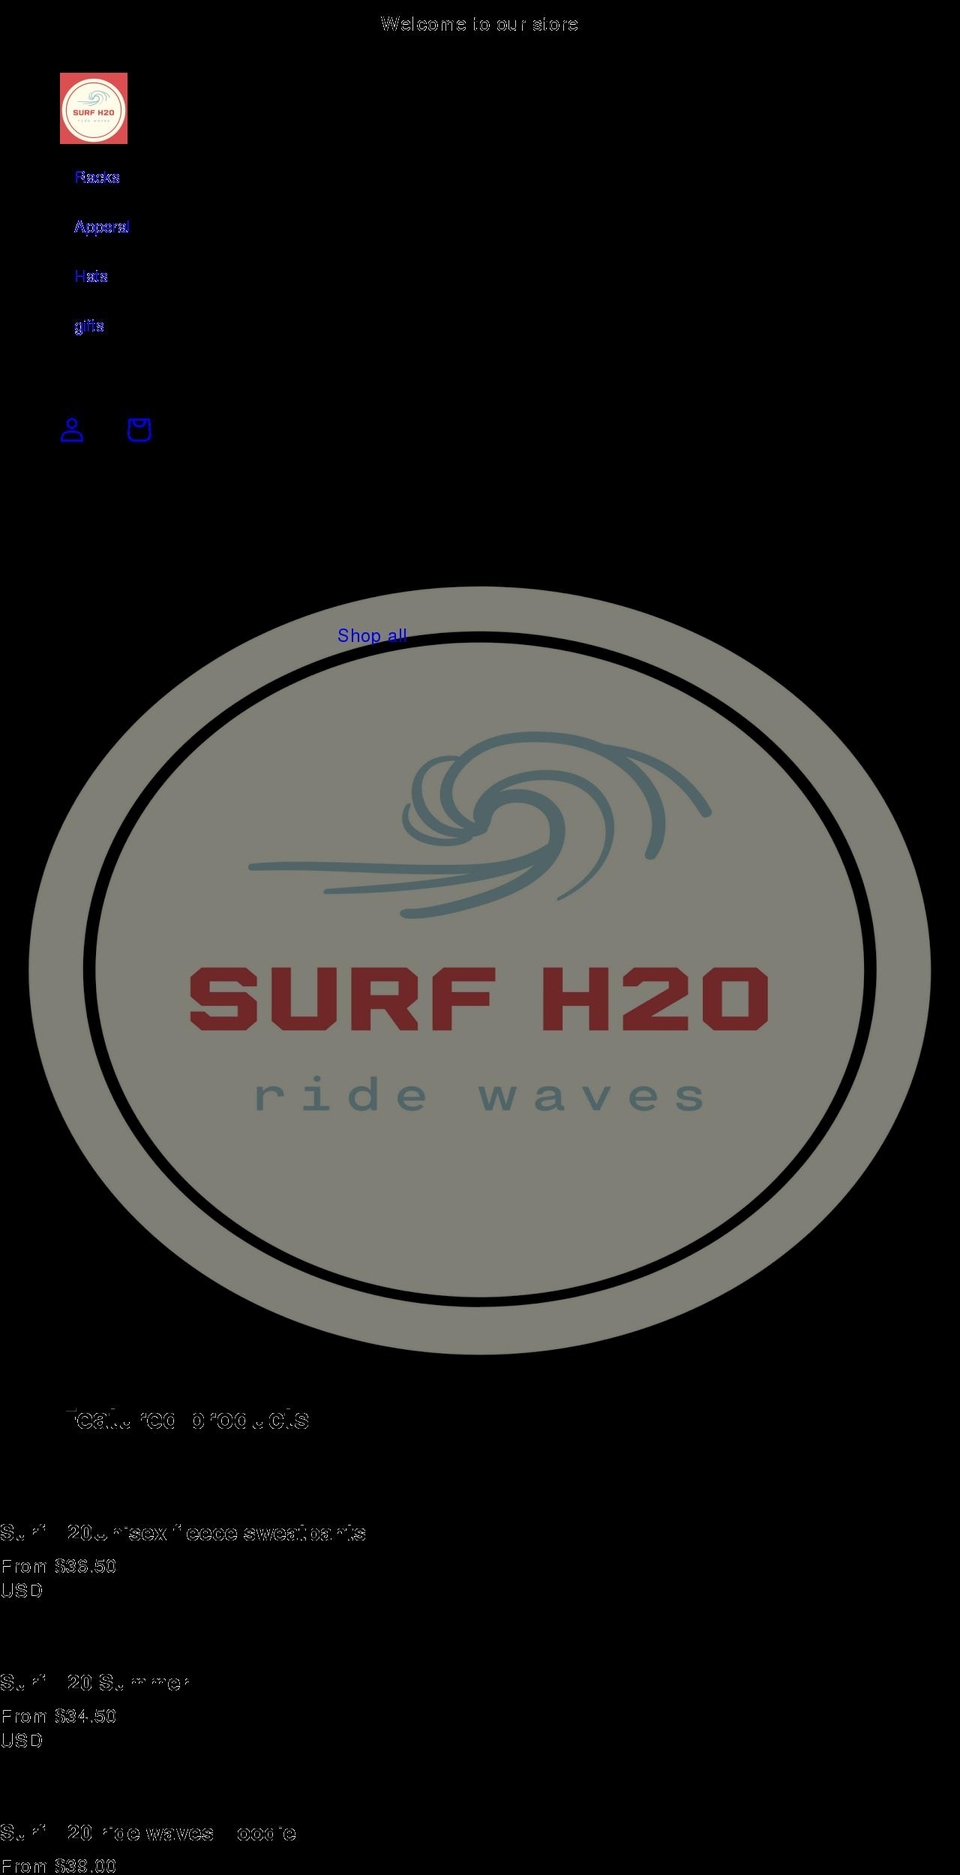 Ride with Installments message Shopify theme site example surfh20.com